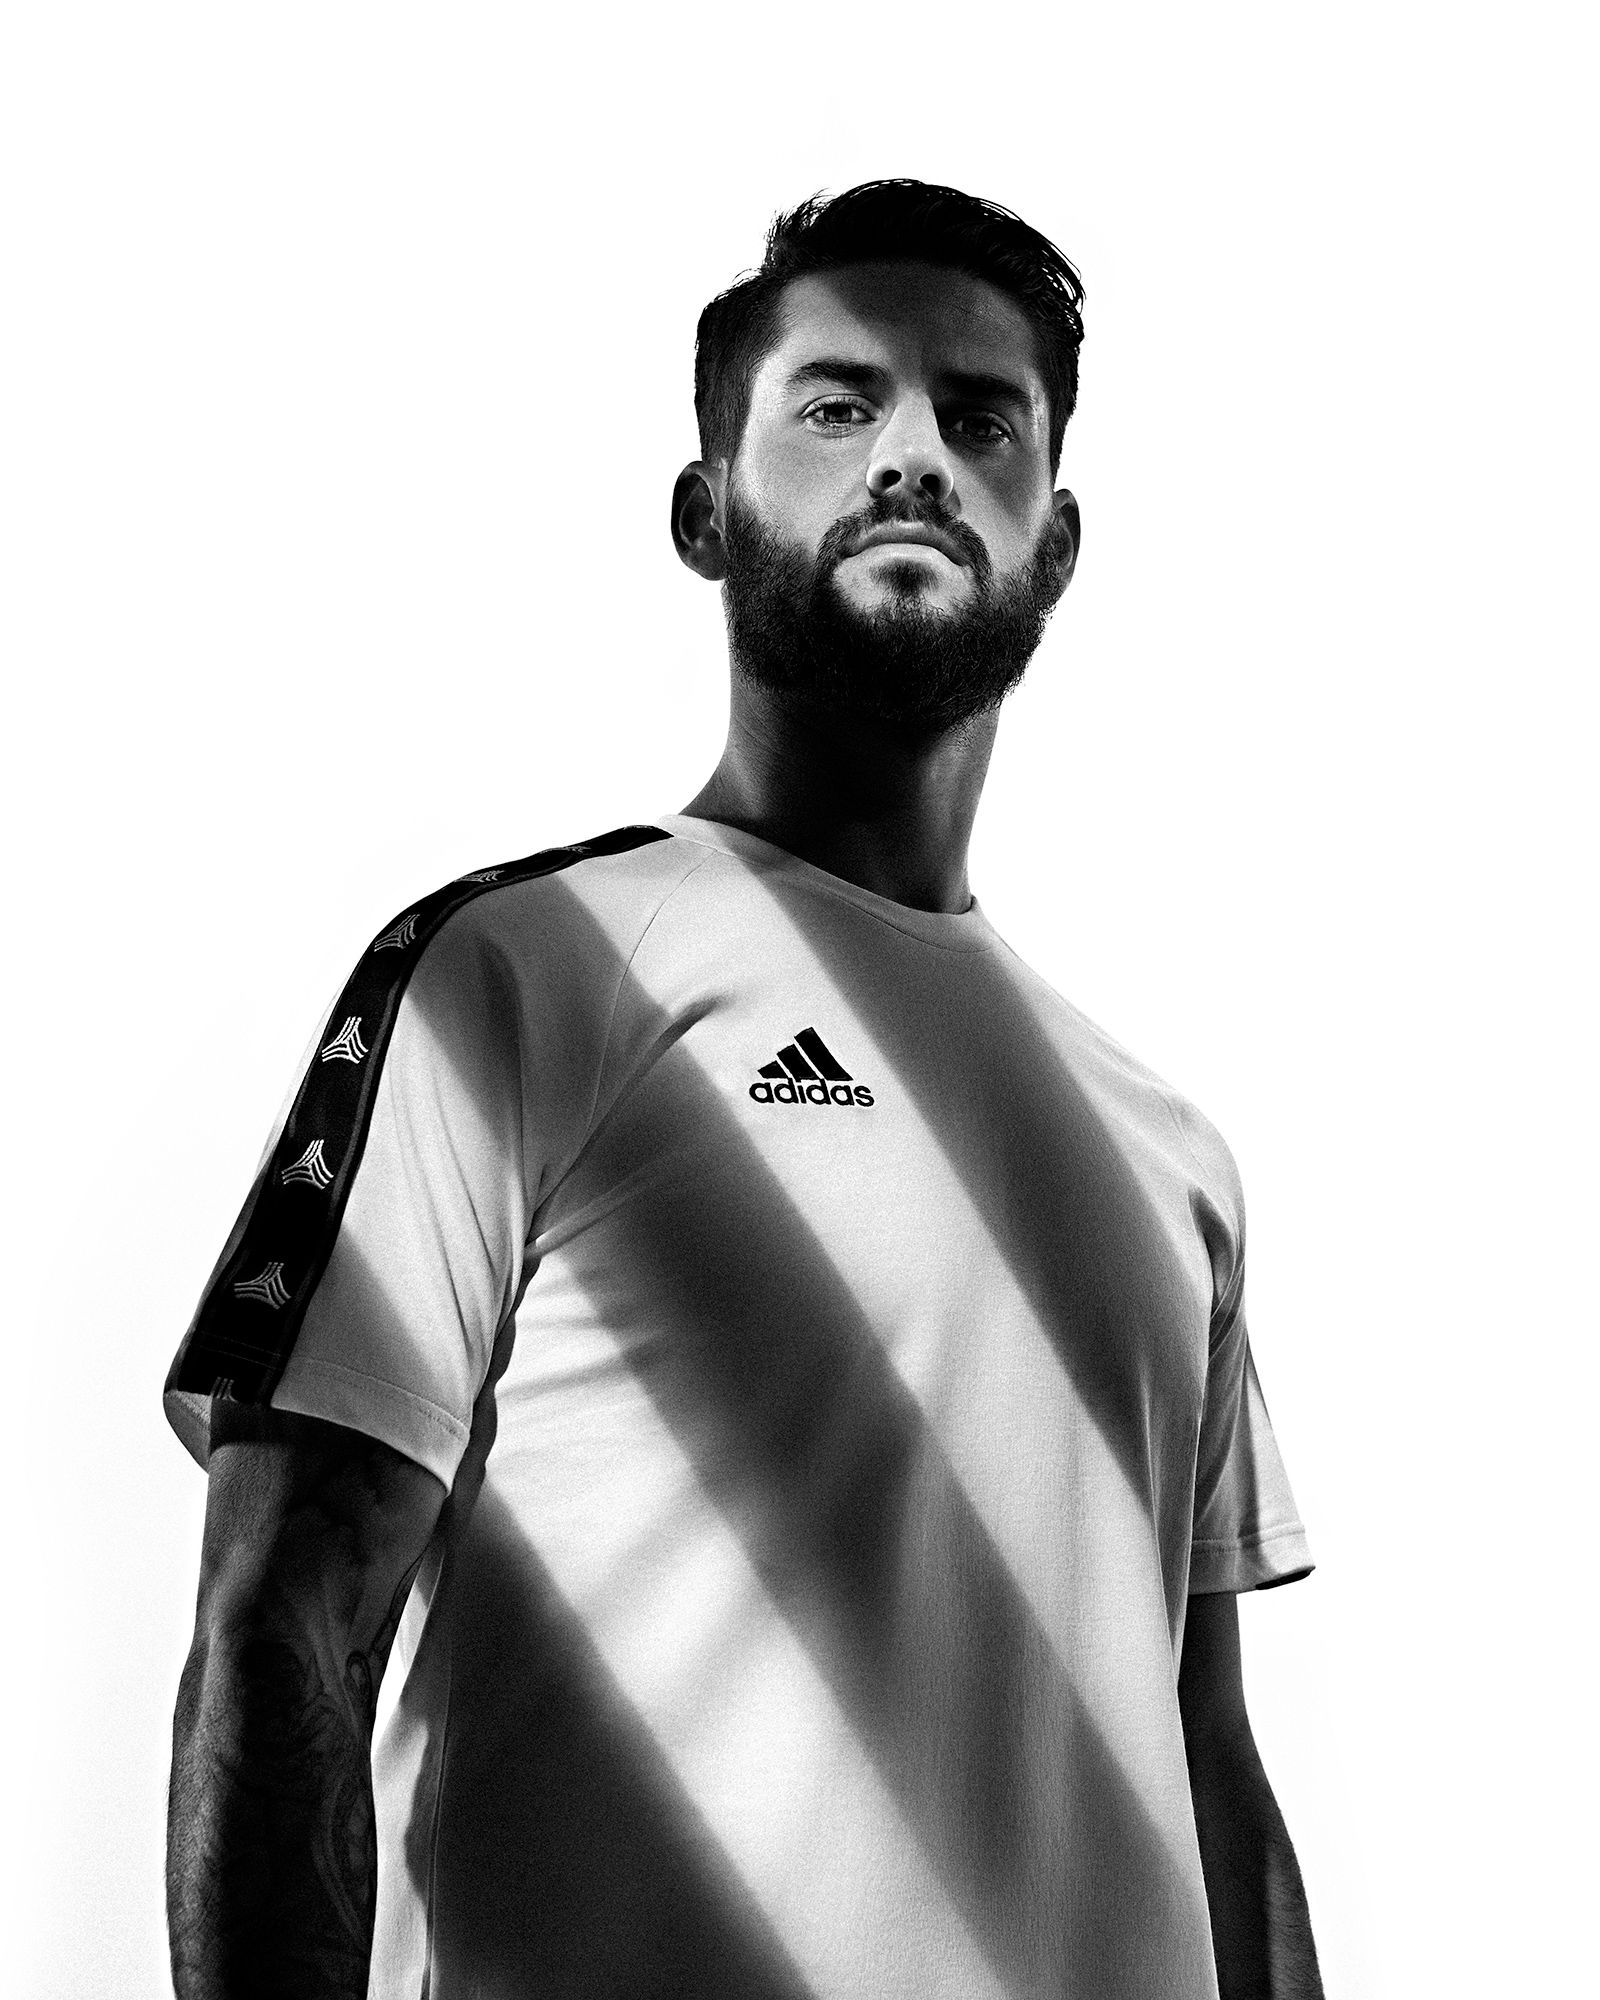 ISCO joining Adidas by Lucho Vidales for Adidas